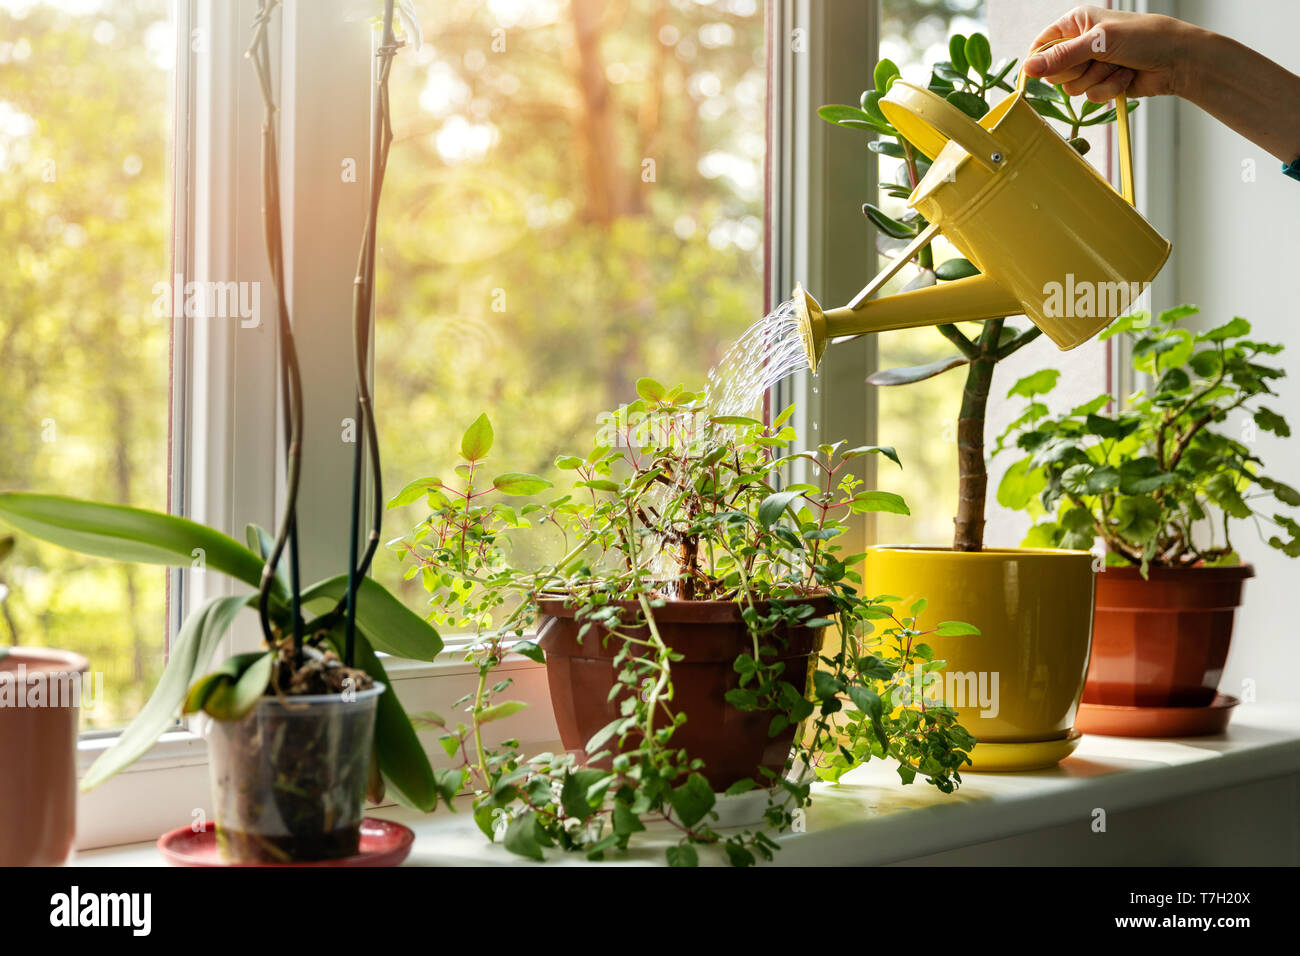 hand with water can watering indoor plants on windowsill Stock Photo